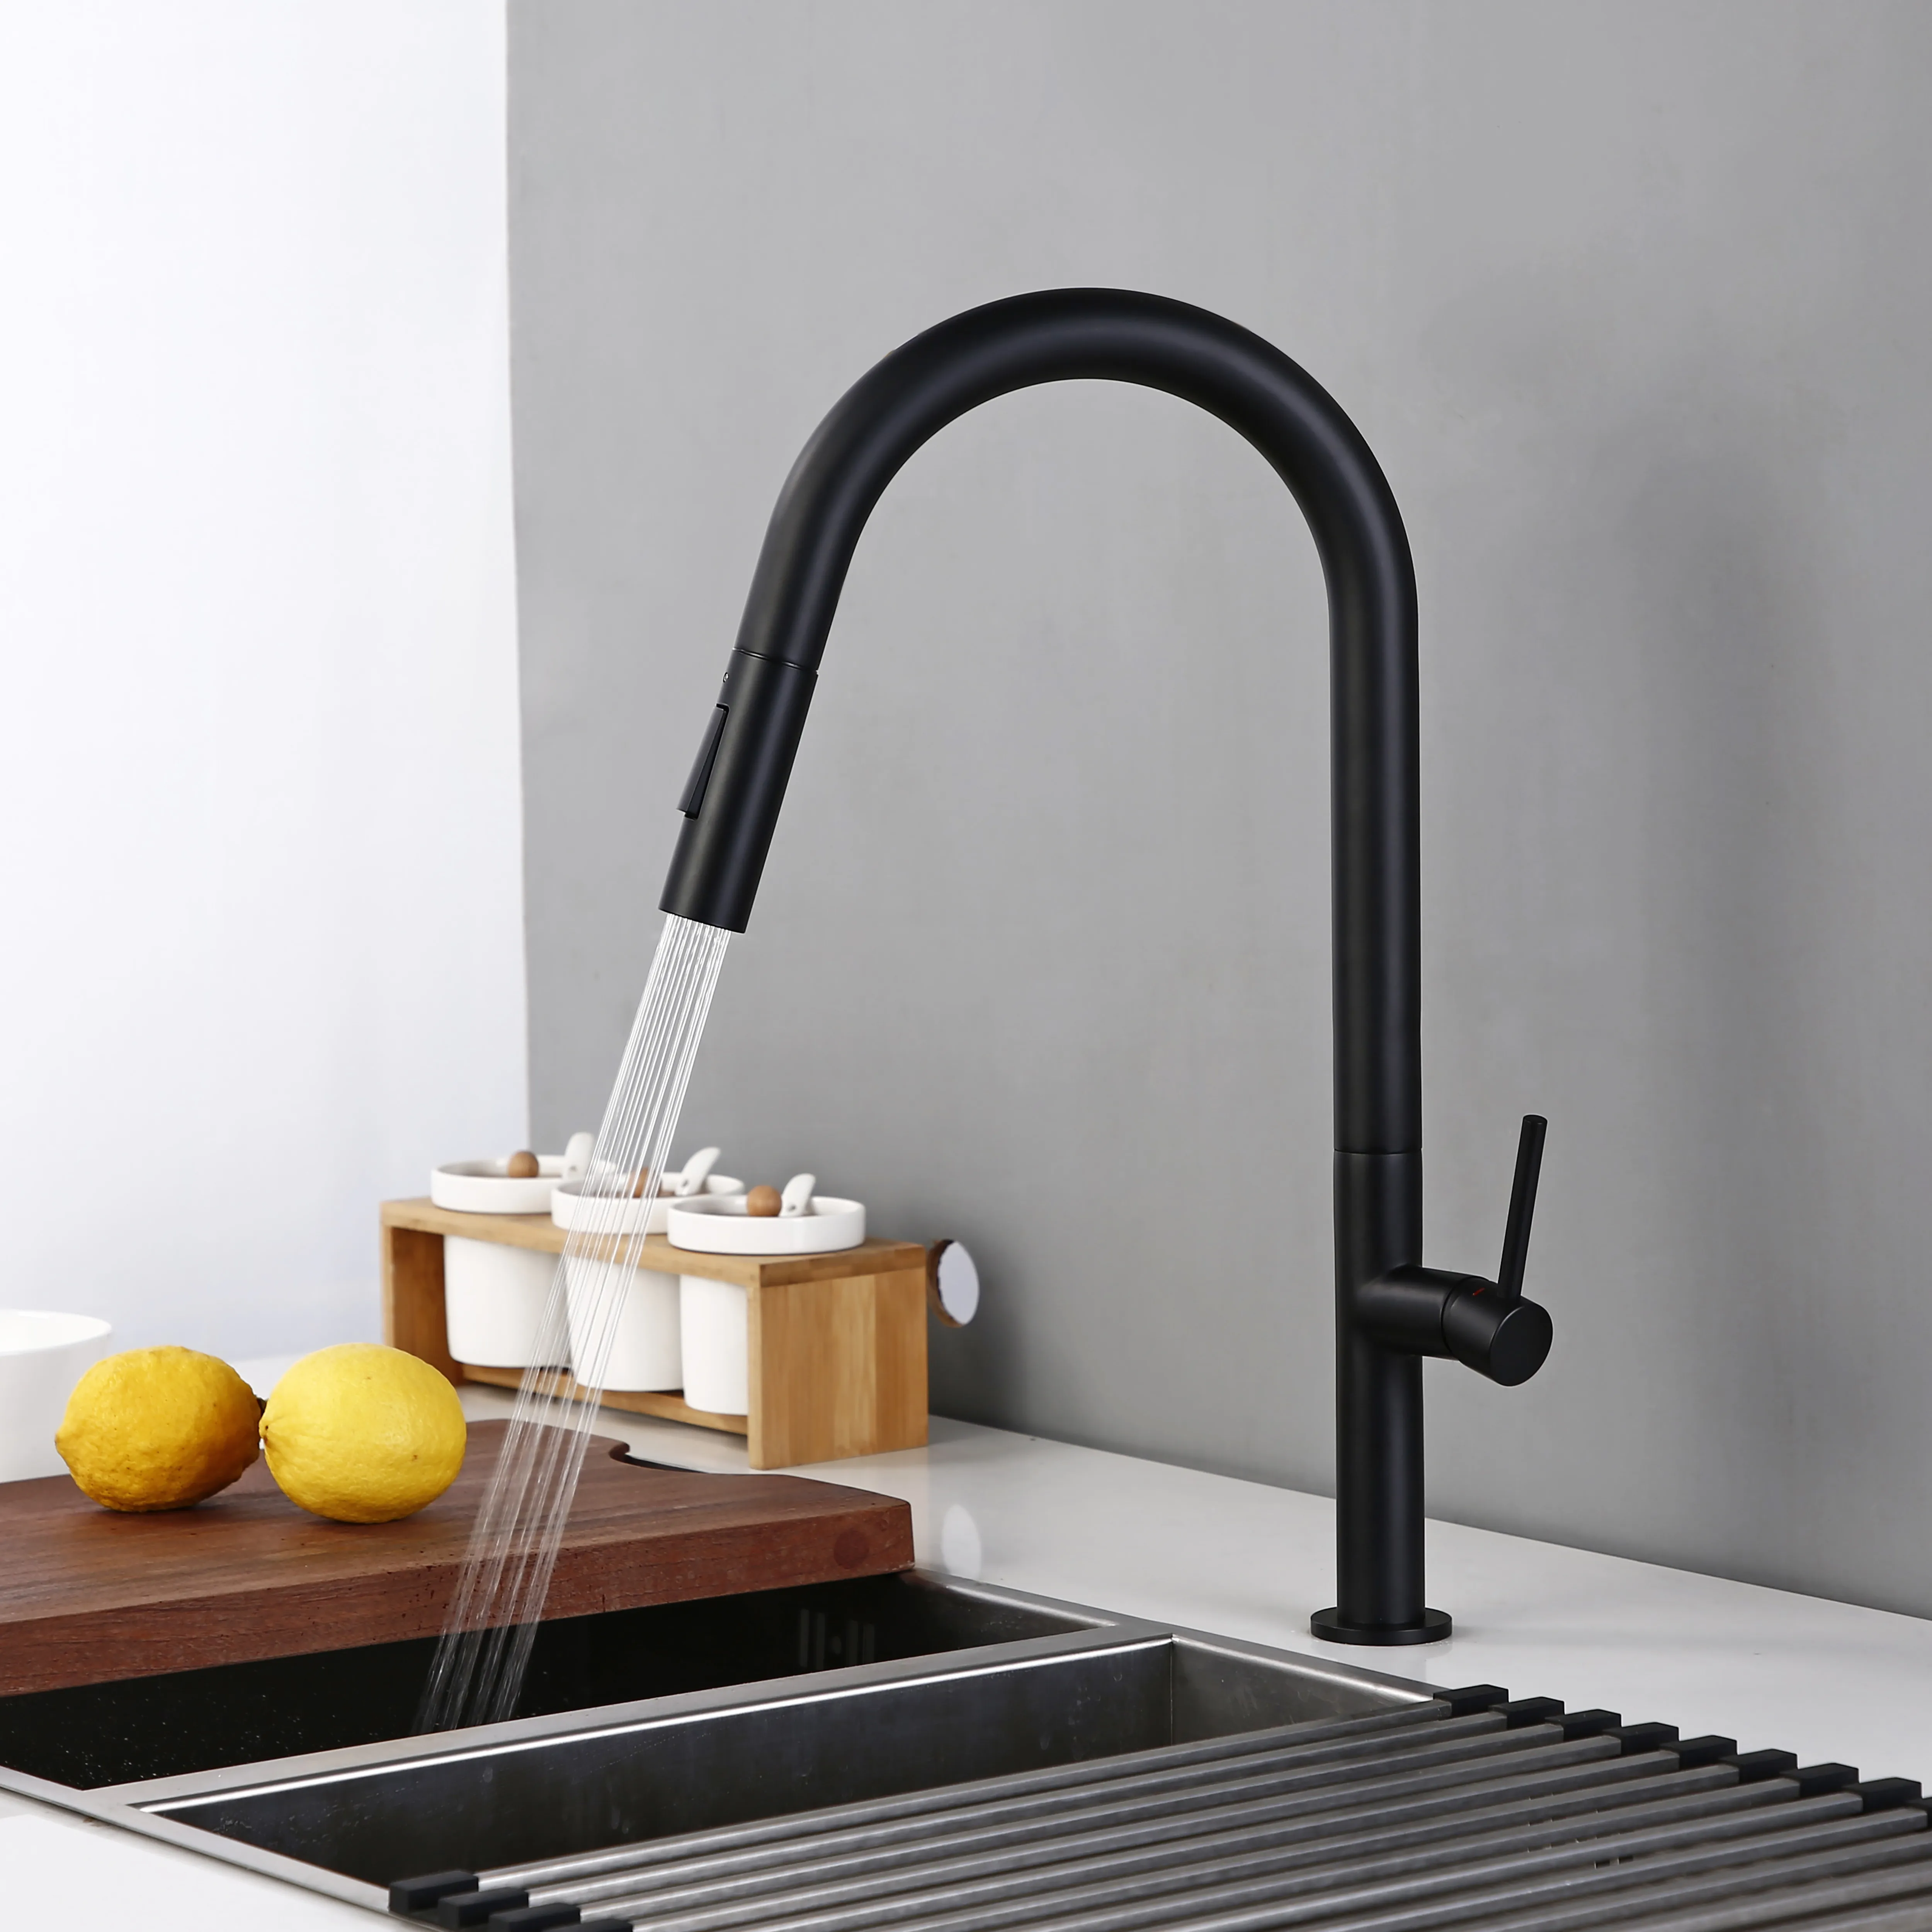 Brass Pull Out Kitchen Faucet Brushed Chrome and Black 360 degree rotation kitchen Hot and cold water Sink taps Kitchen Faucet